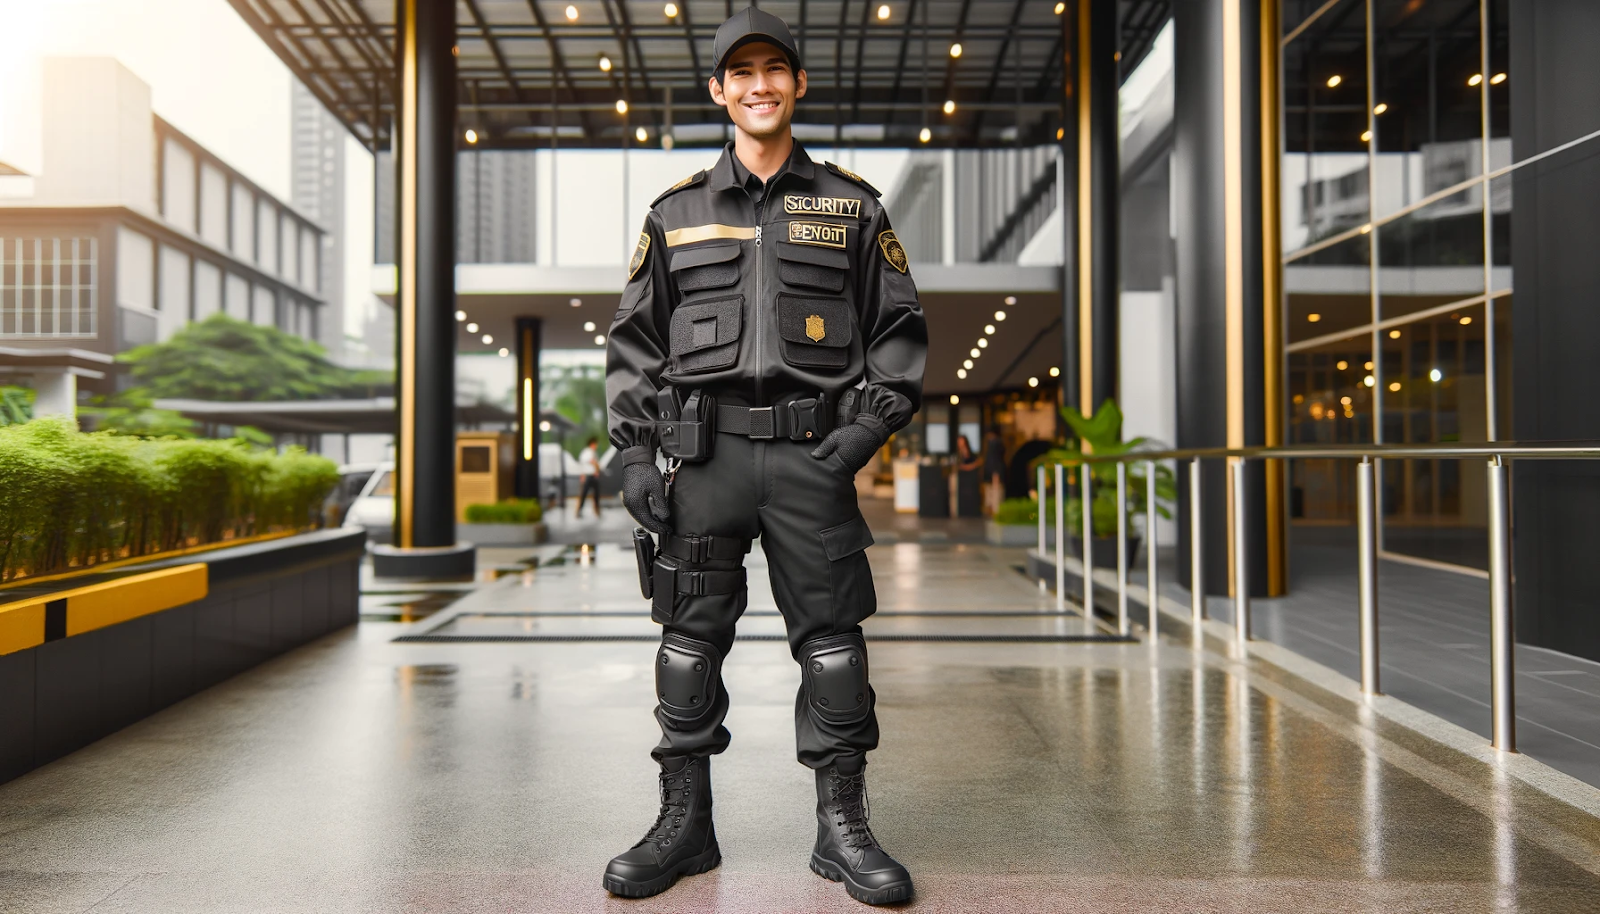 A cheerful security guard in black and gold attire is patrolling an area, showcasing ideal protective and comfortable gear for the job.